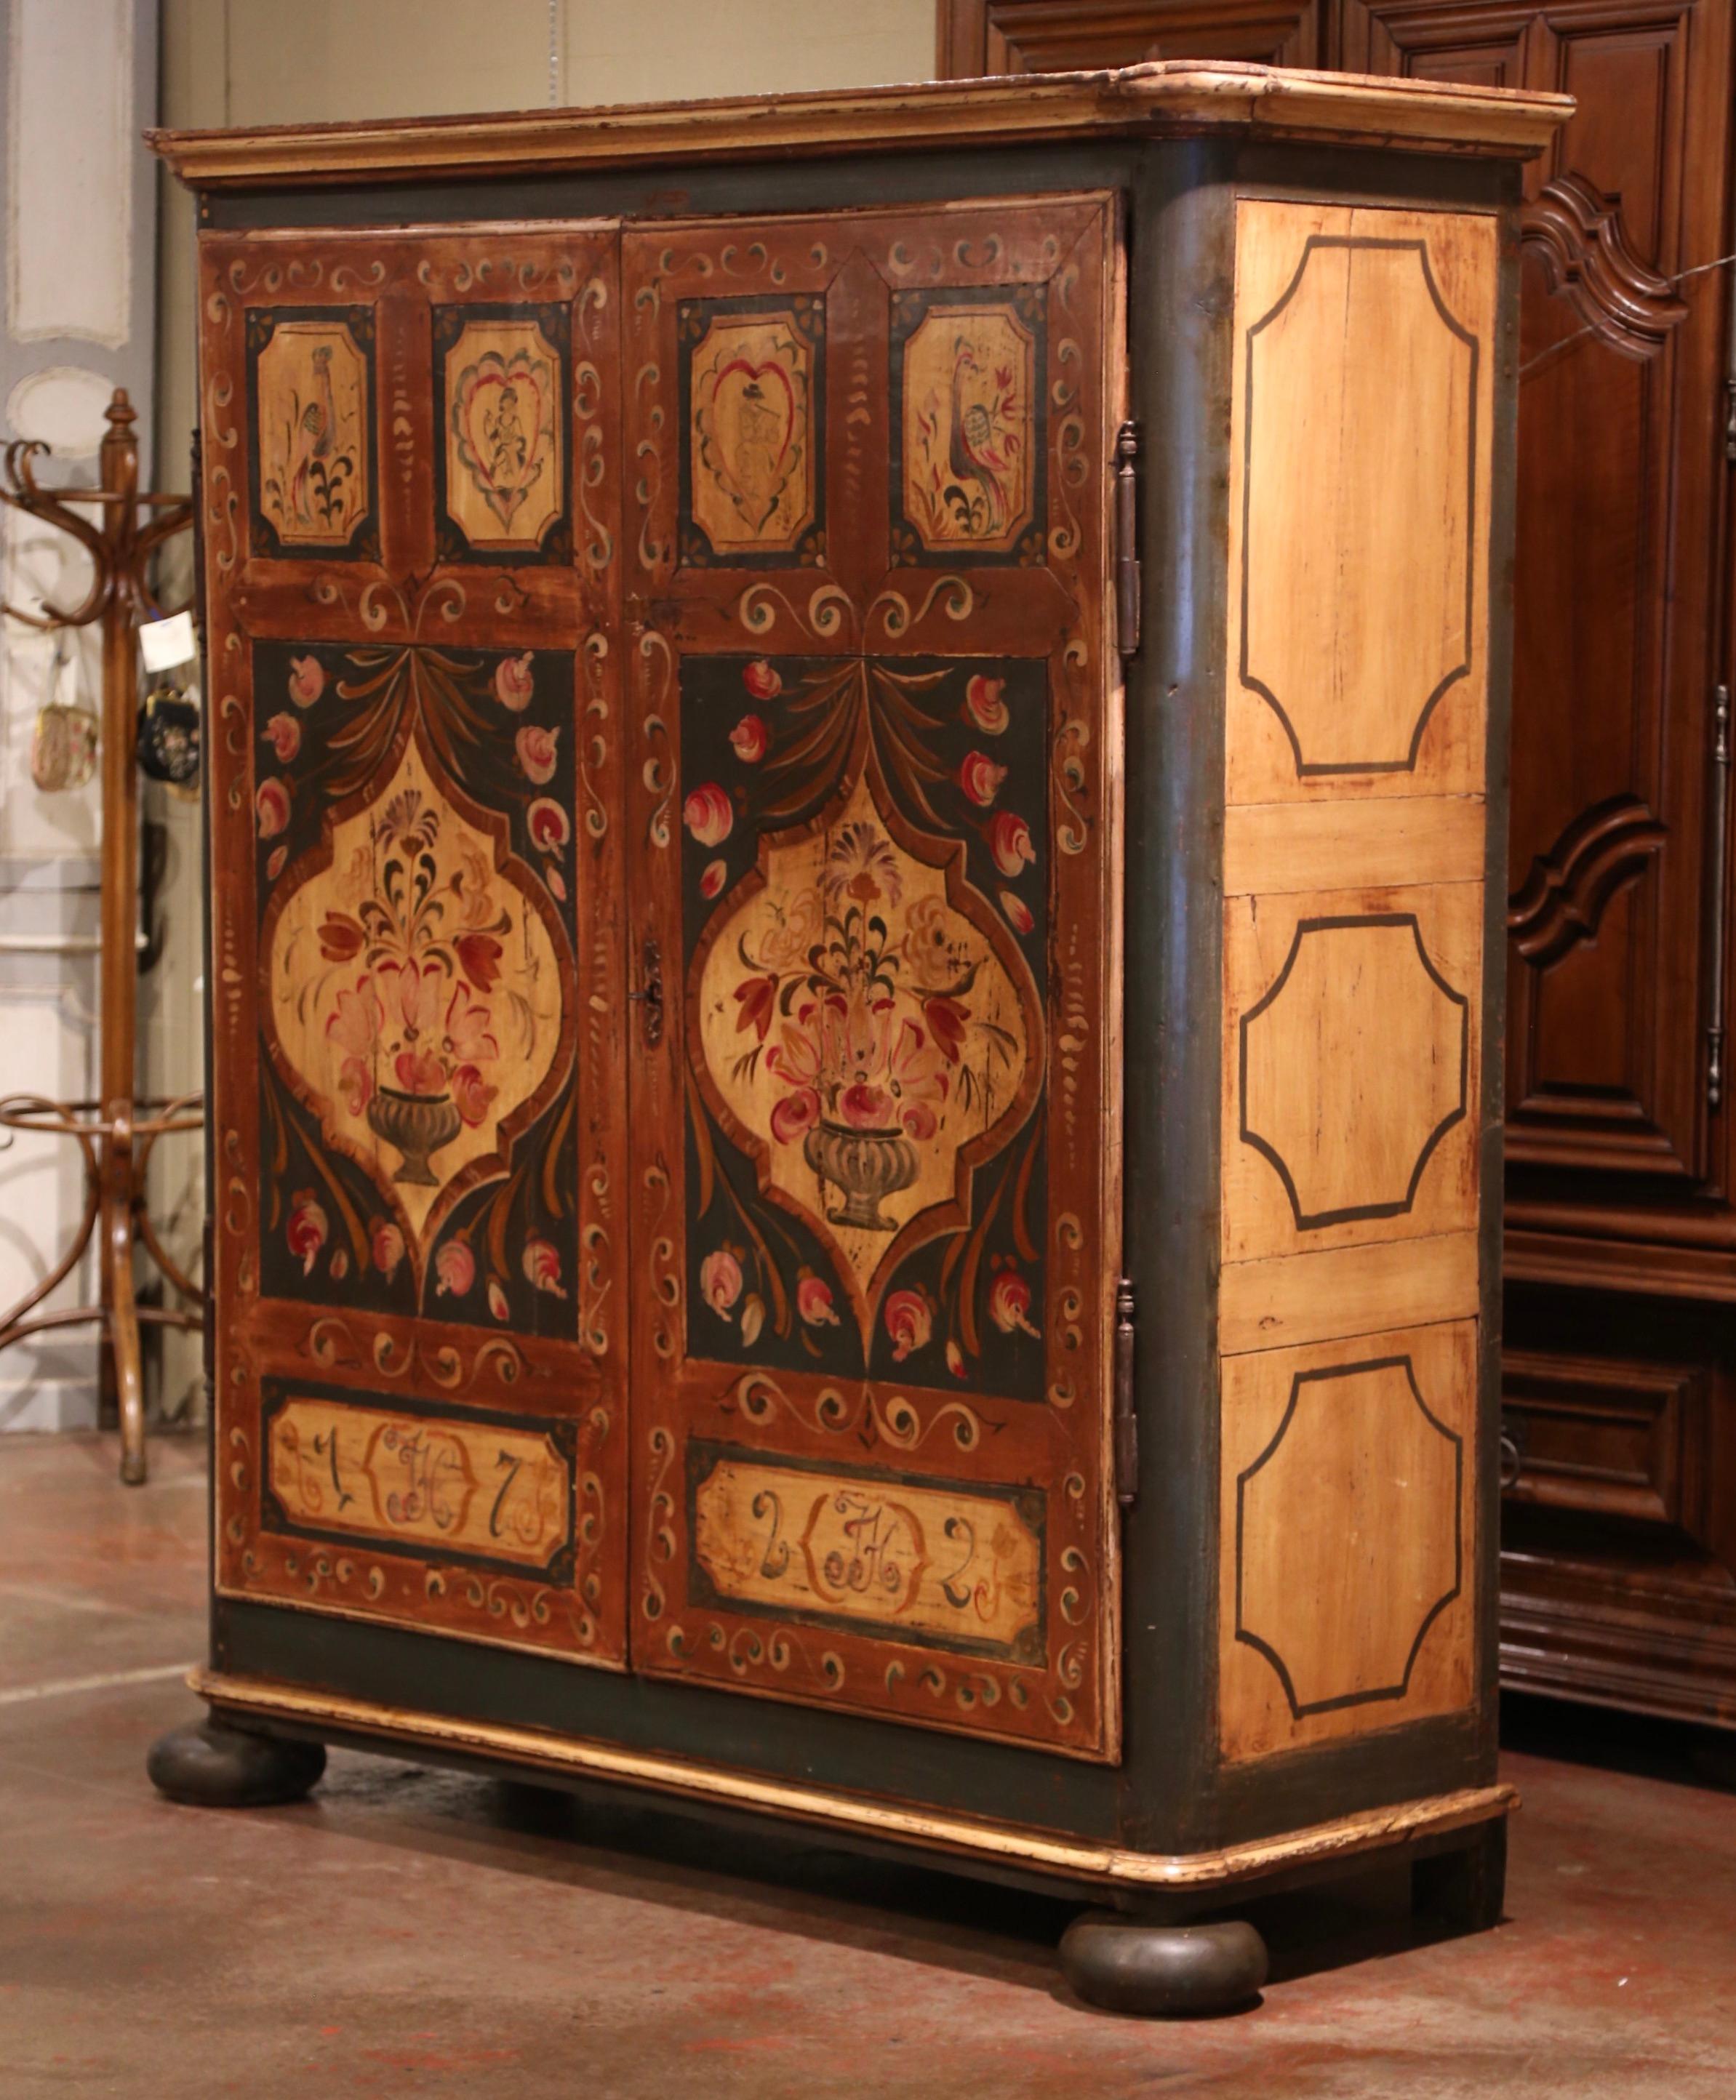 Hide your TV in this large and colorful painted antique armoire. Crafted in the Alsace Lorraine region of France circa 1820, the cabinet stands on front bun feet over a straight apron, and features a top decorative crown. The wardrobe is dressed